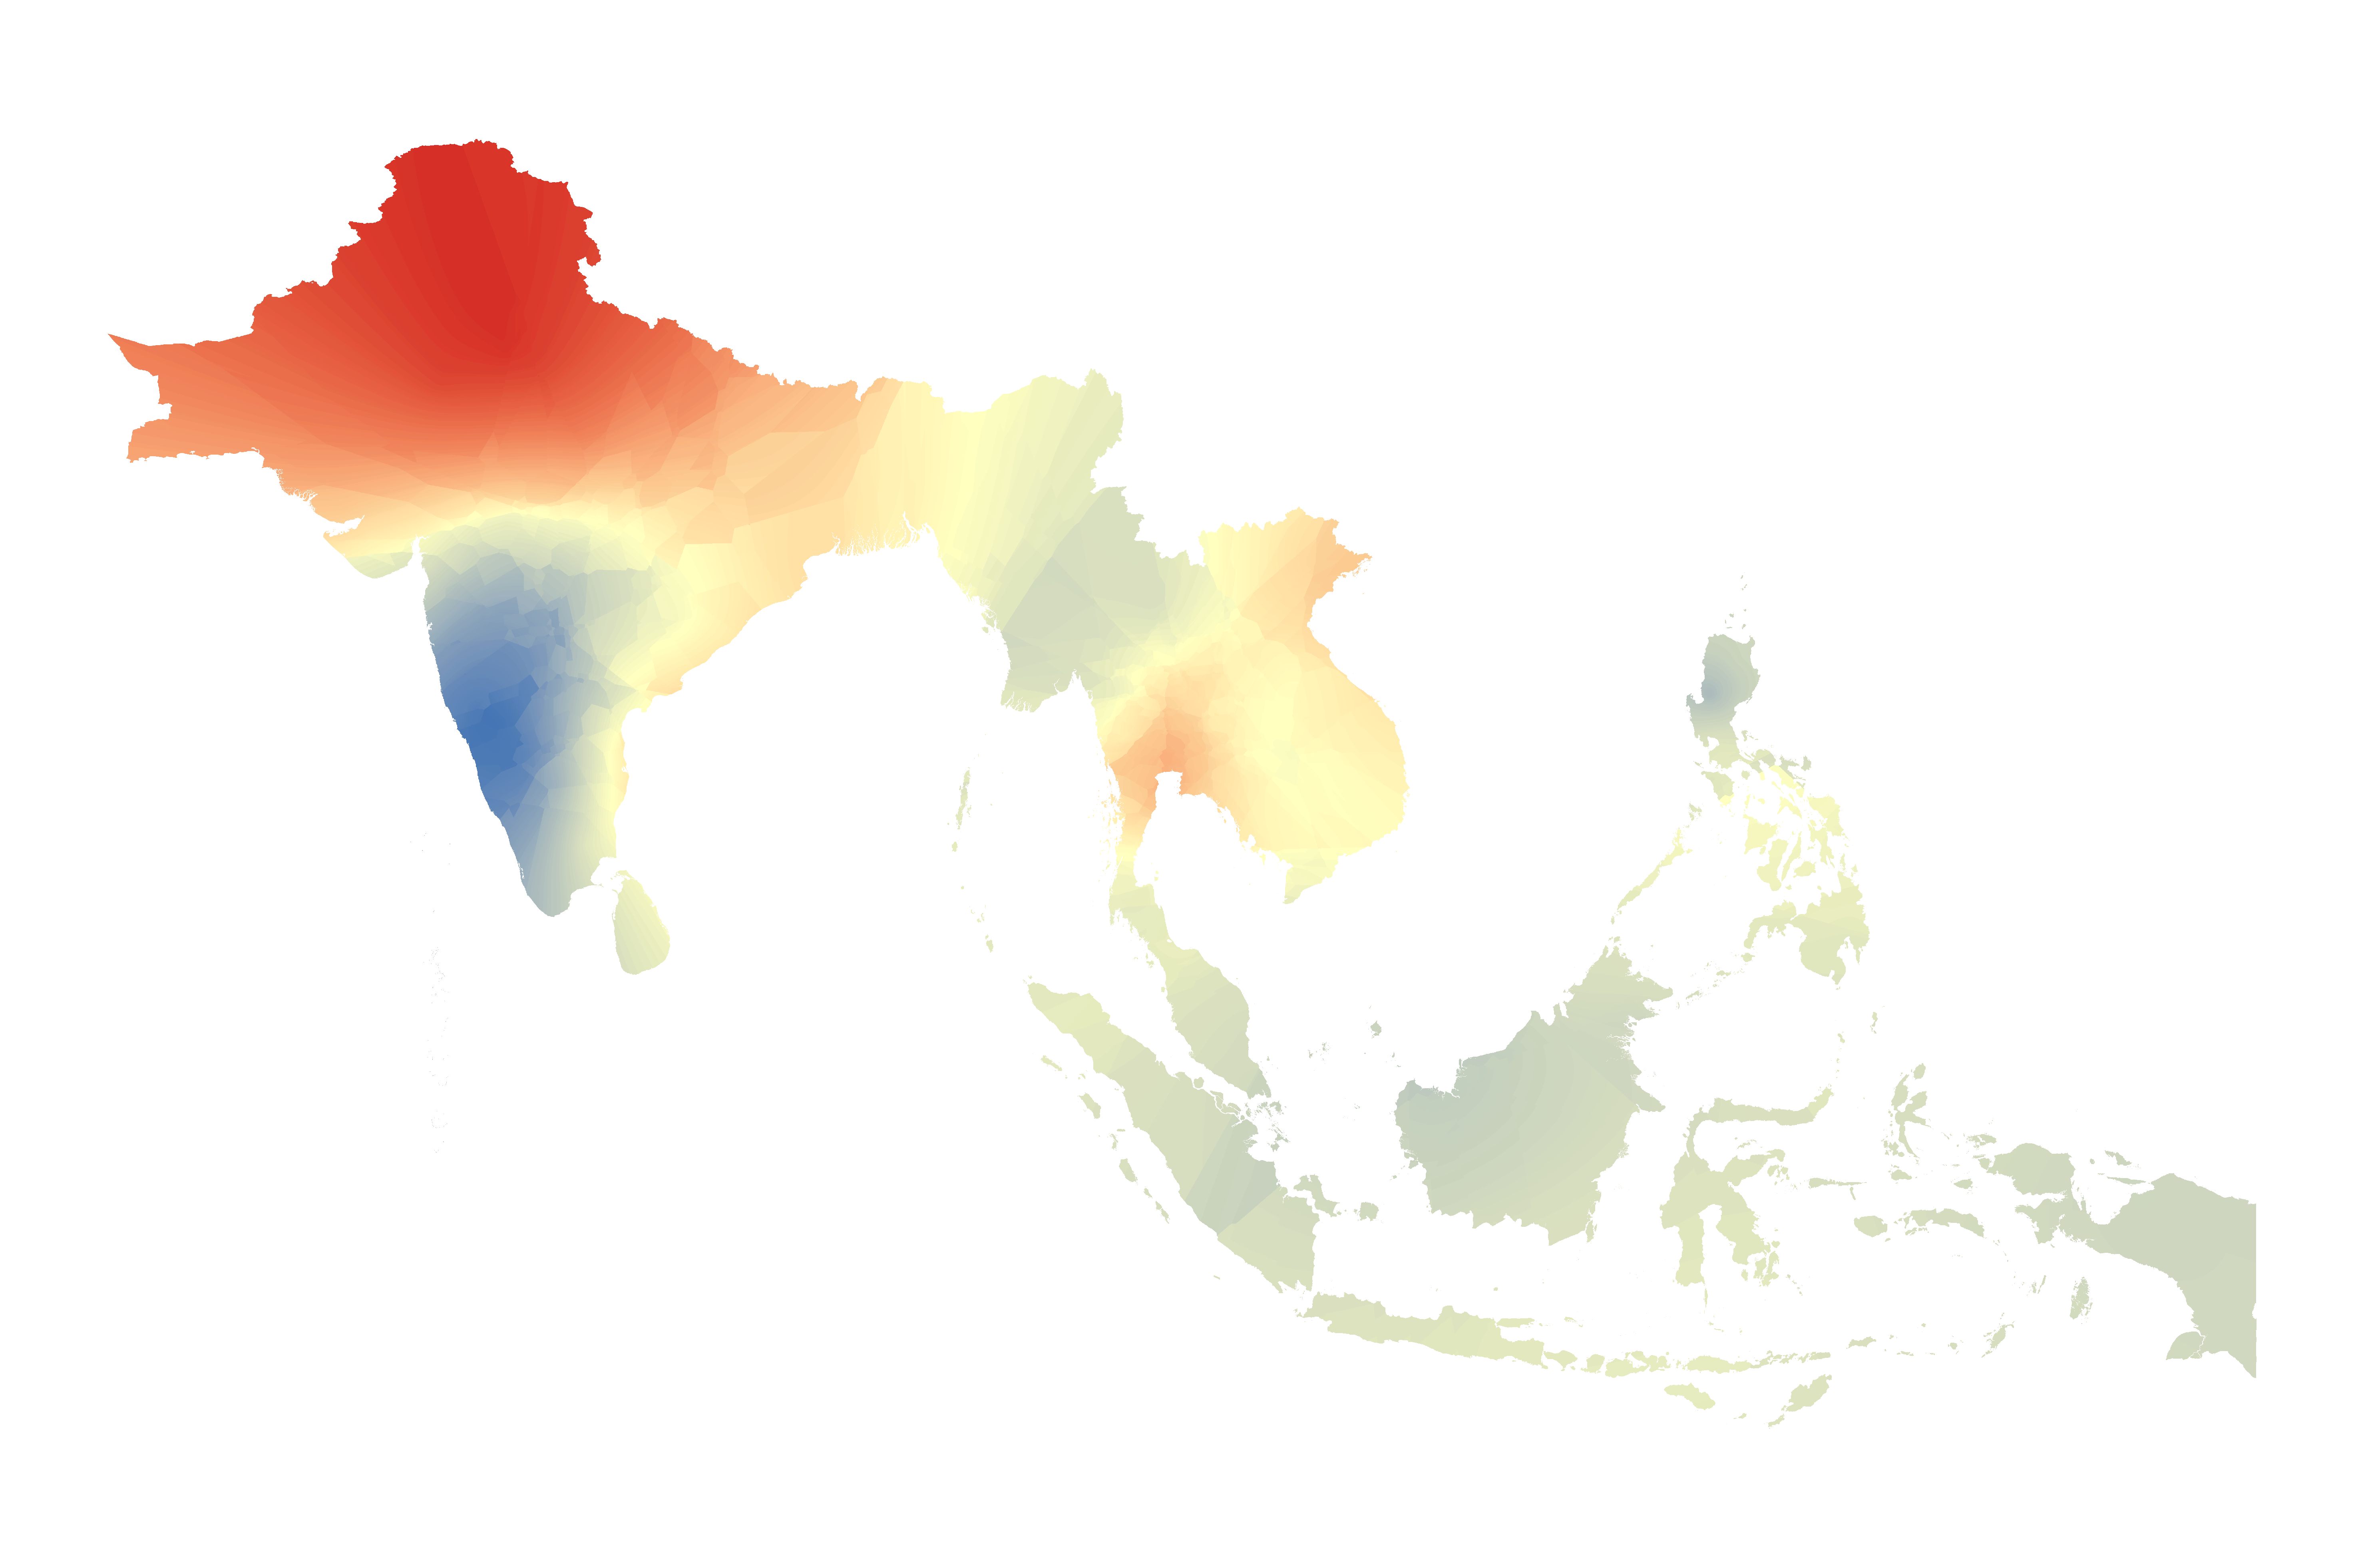 Monthly mean temperature monitoring data sets for south and southeast Asia(1989-2018)